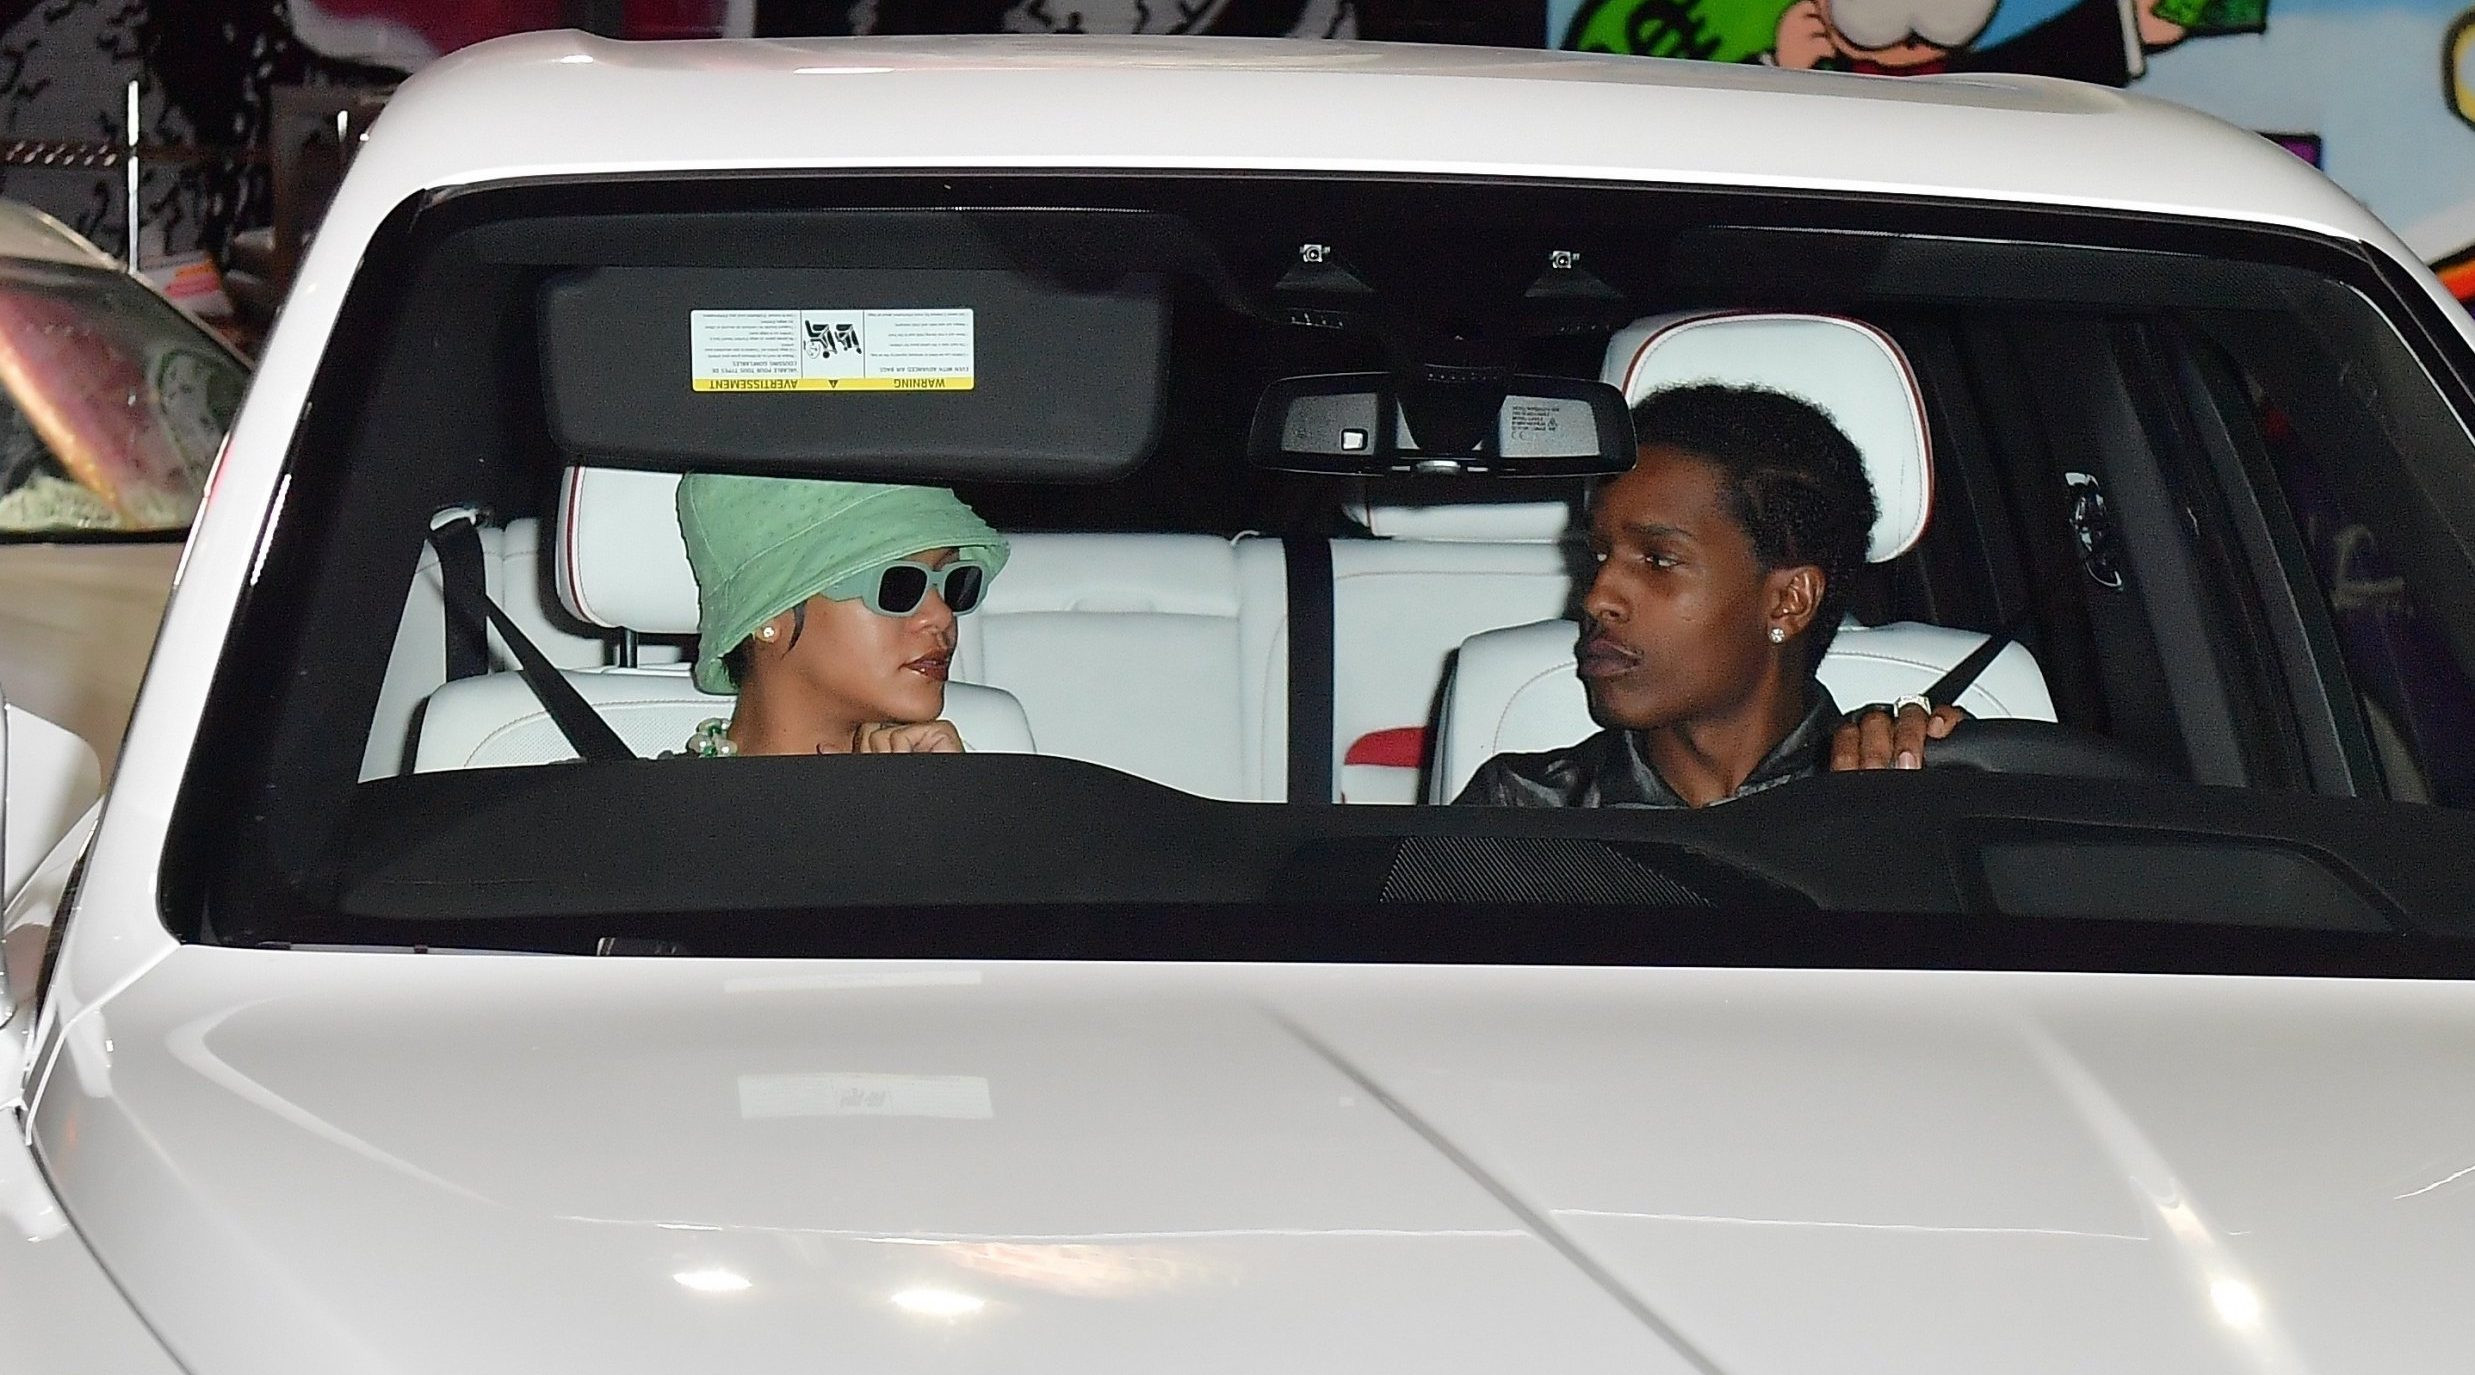 Rihanna heads to recording studio with boyfriend A$AP Rocky to hopefully record the collaboration we need